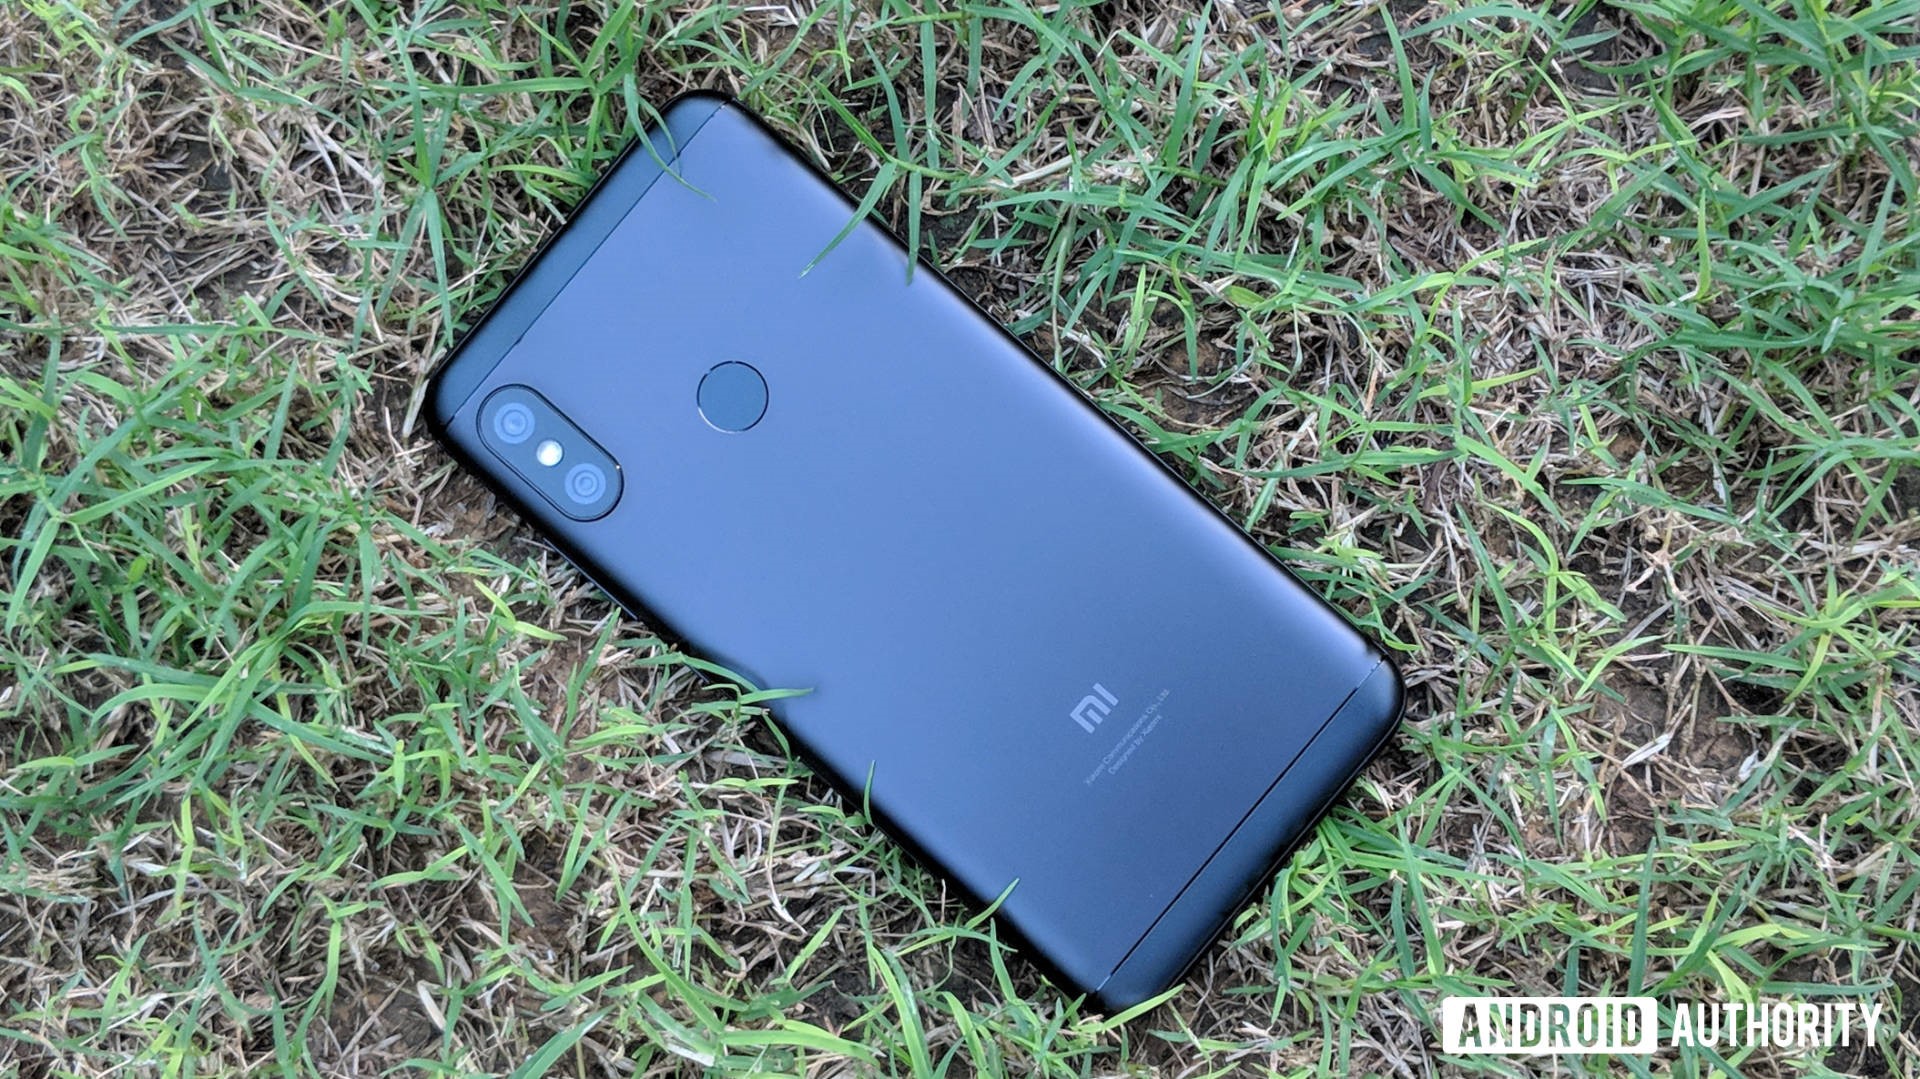 The front of the Xiaomi Redmi 6 Pro.